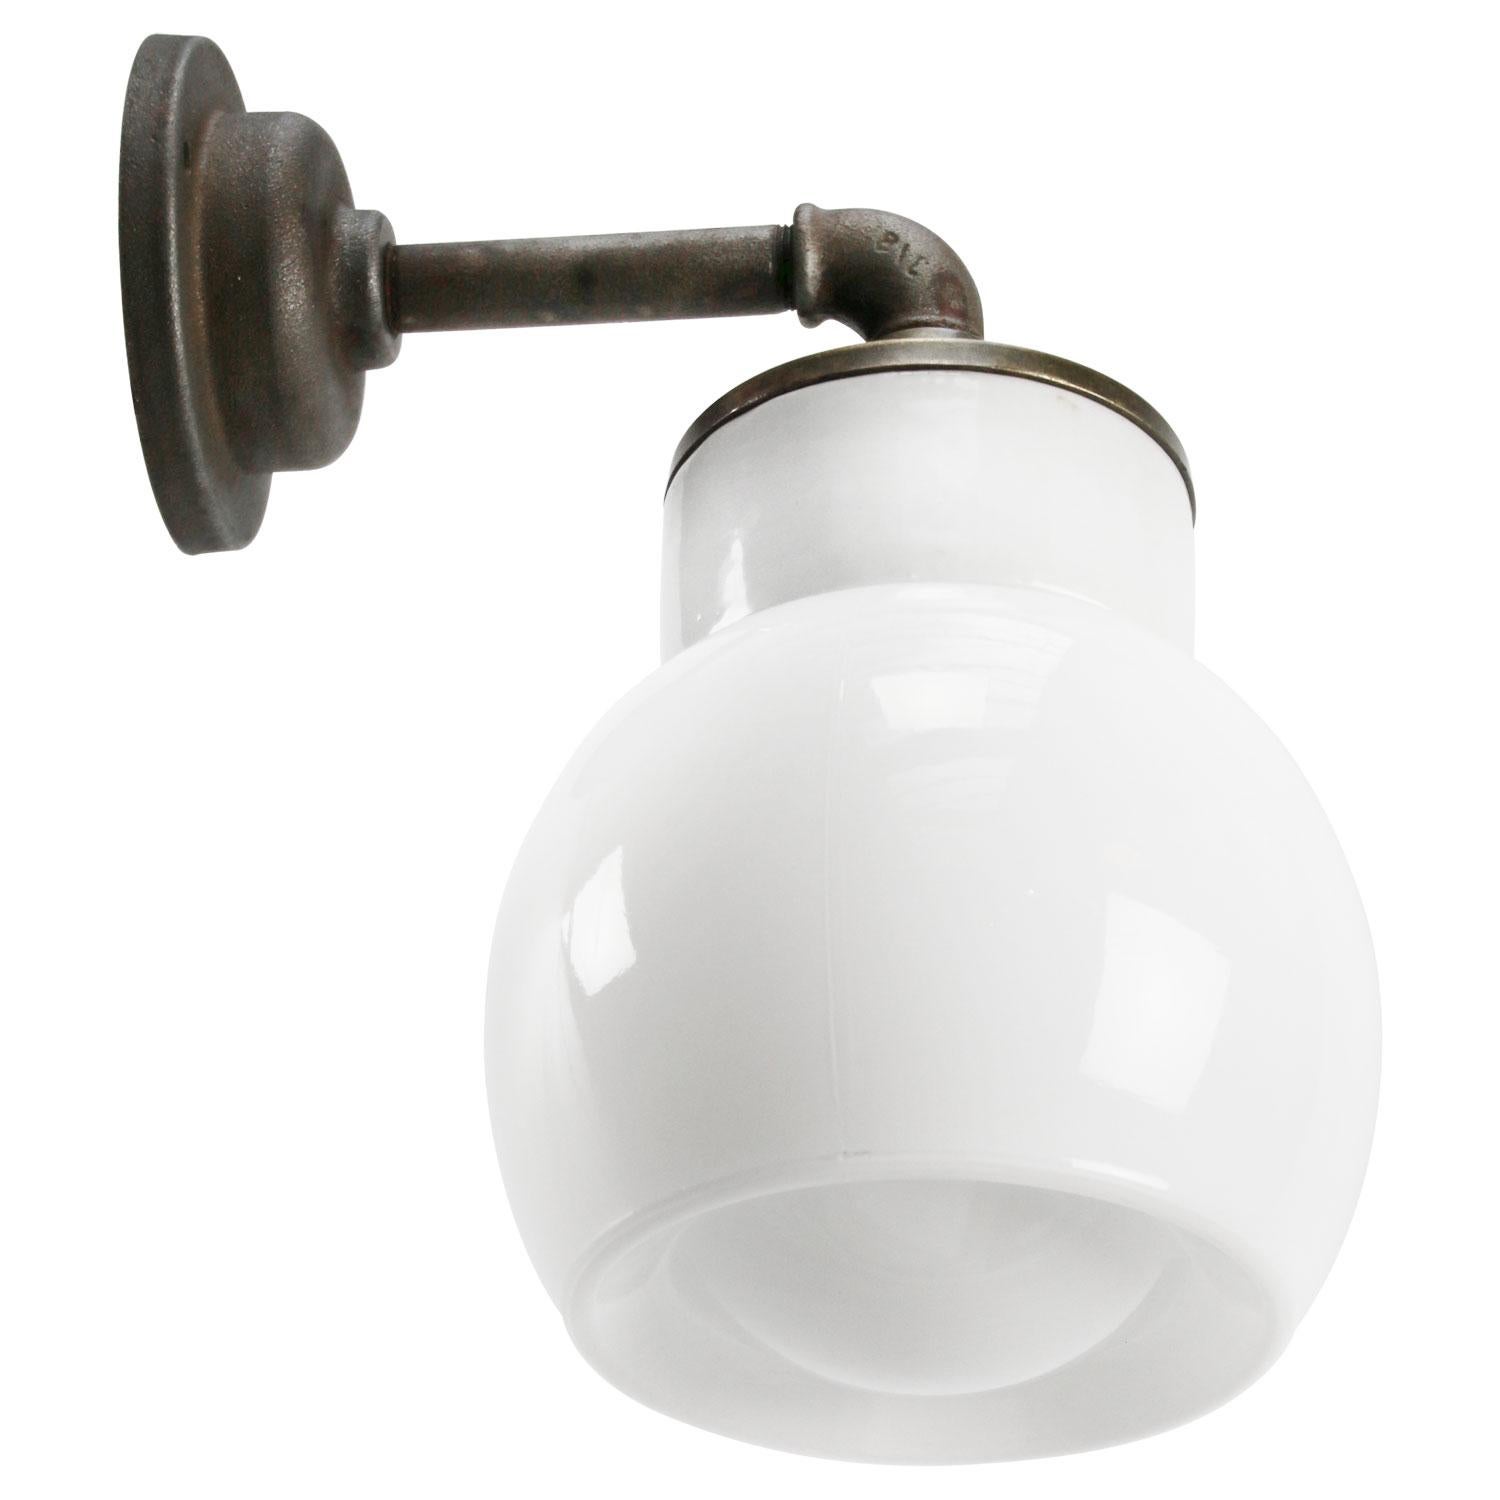 Porcelain industrial wall lamp.
White porcelain, cast iron, brass and Opaline milk glass.
2 conductors, no ground.

Diameter wall mount 10.5 cm / 4”

for use inside only

Measures: Weight: 2.05 kg / 4.5 lb

Priced per individual item. All lamps have